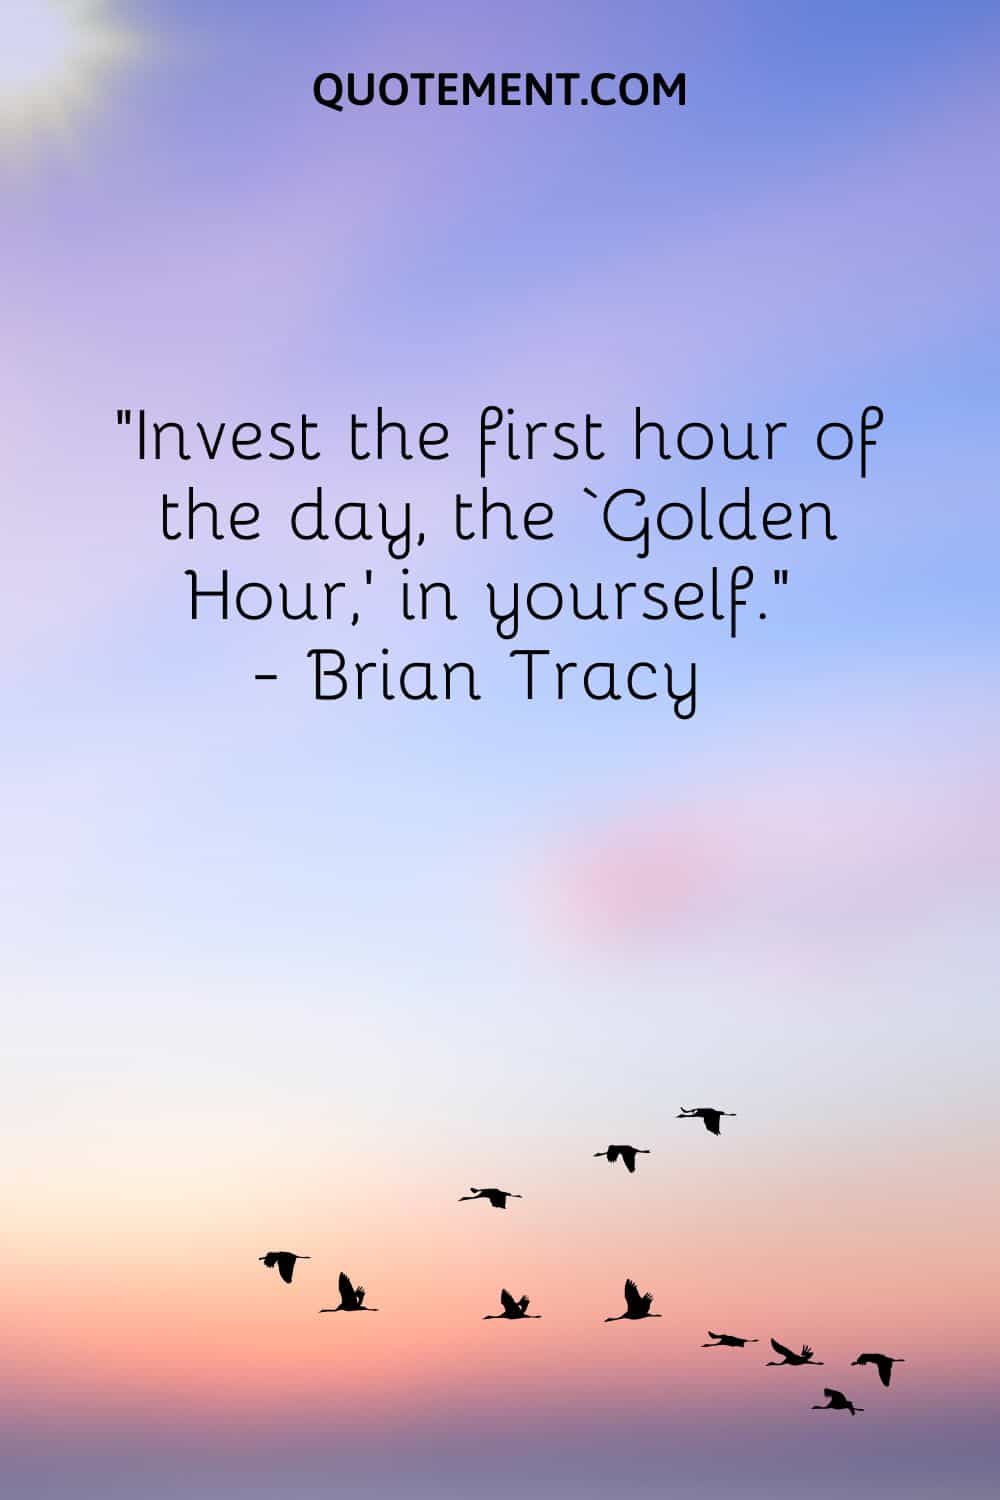 Invest the first hour of the day, the ‘Golden Hour,’ in yourself.